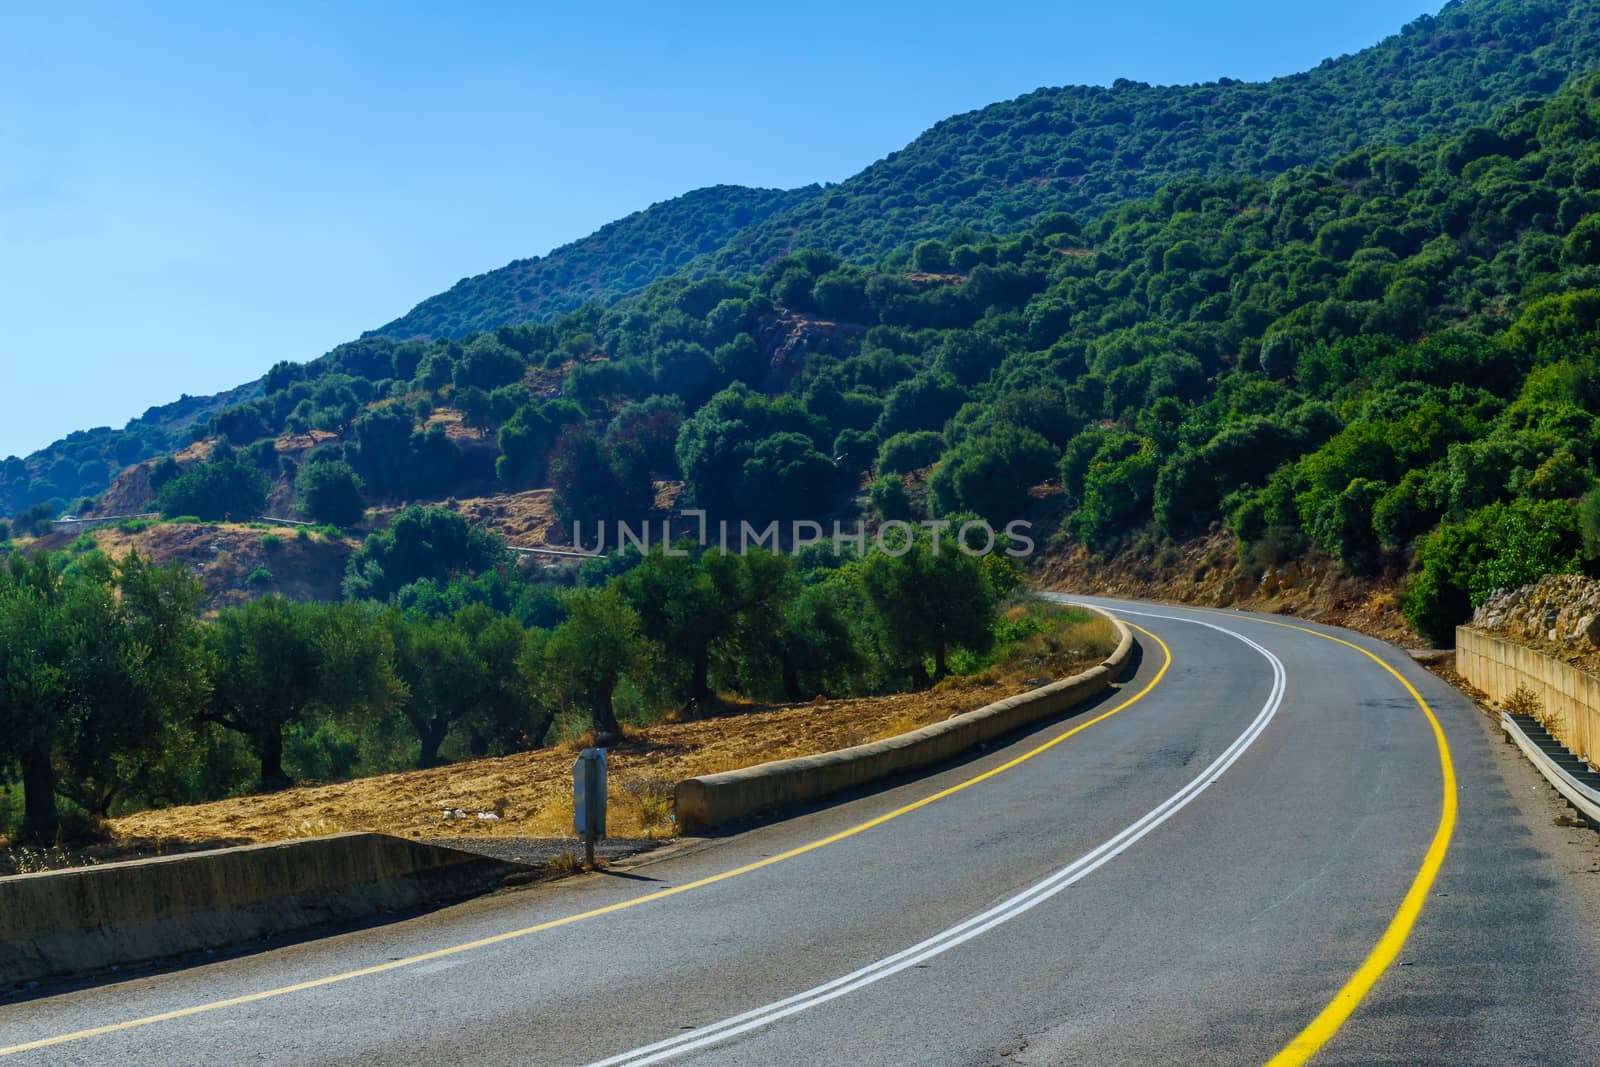 View of road and landscape in the upper galilee, northern Israel